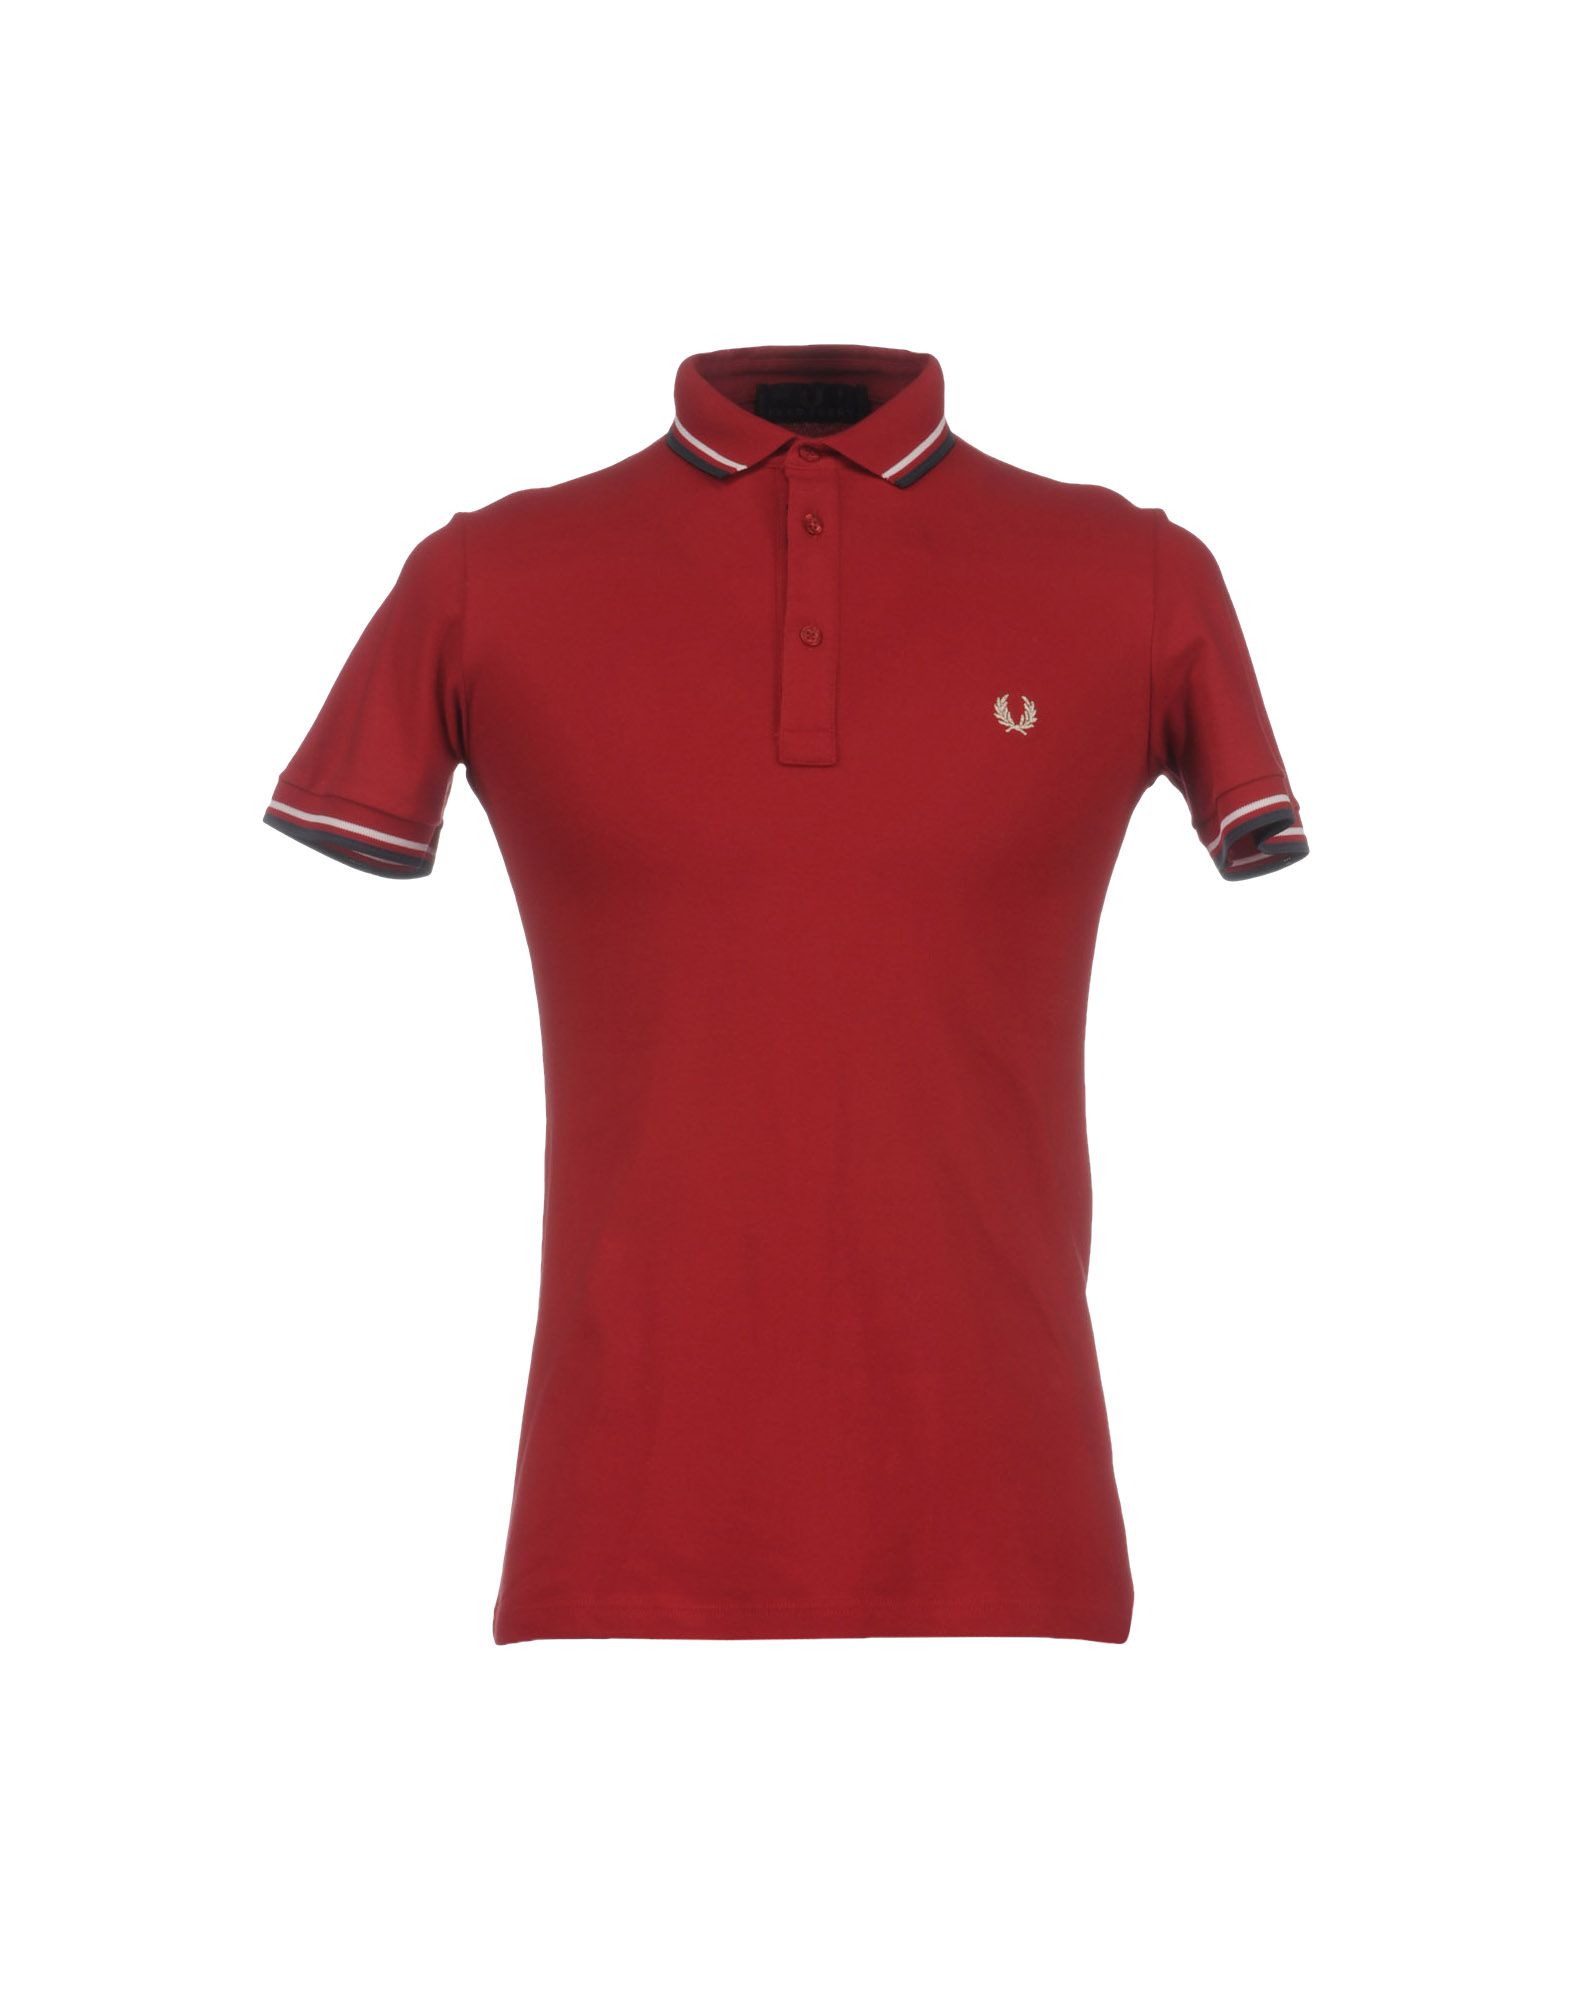 Foto fred perry polos
 foto 321557